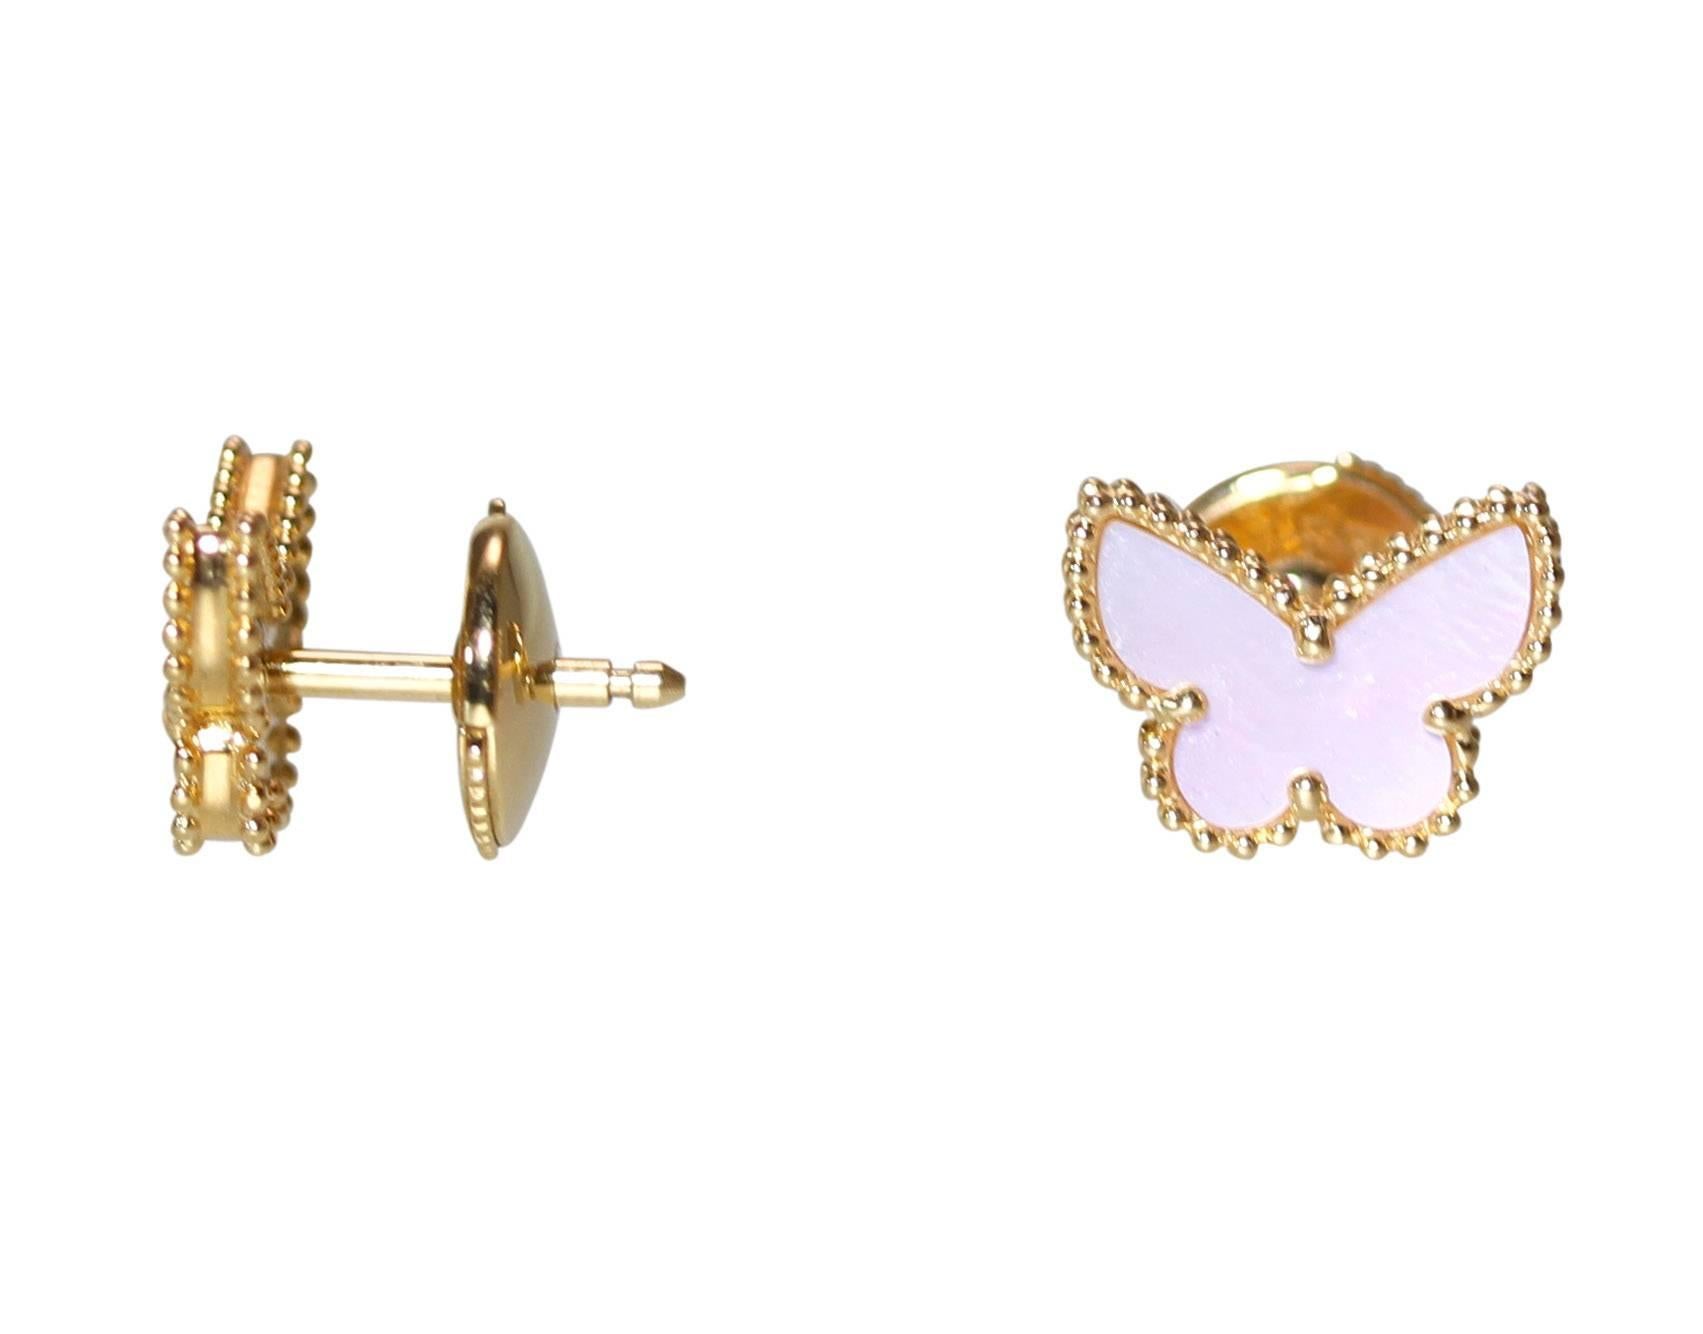 A Pair of 18 karat gold and mother-of-pearl 'Sweet Alhambra' butterfly stud earrings by Van Cleef & Arpels, each set with carved mother-of-pearl, measuring 1/4 by 3/8 inch, gross weight 2.5 grams, signed VCA, numbered JB122272, stamped G750.